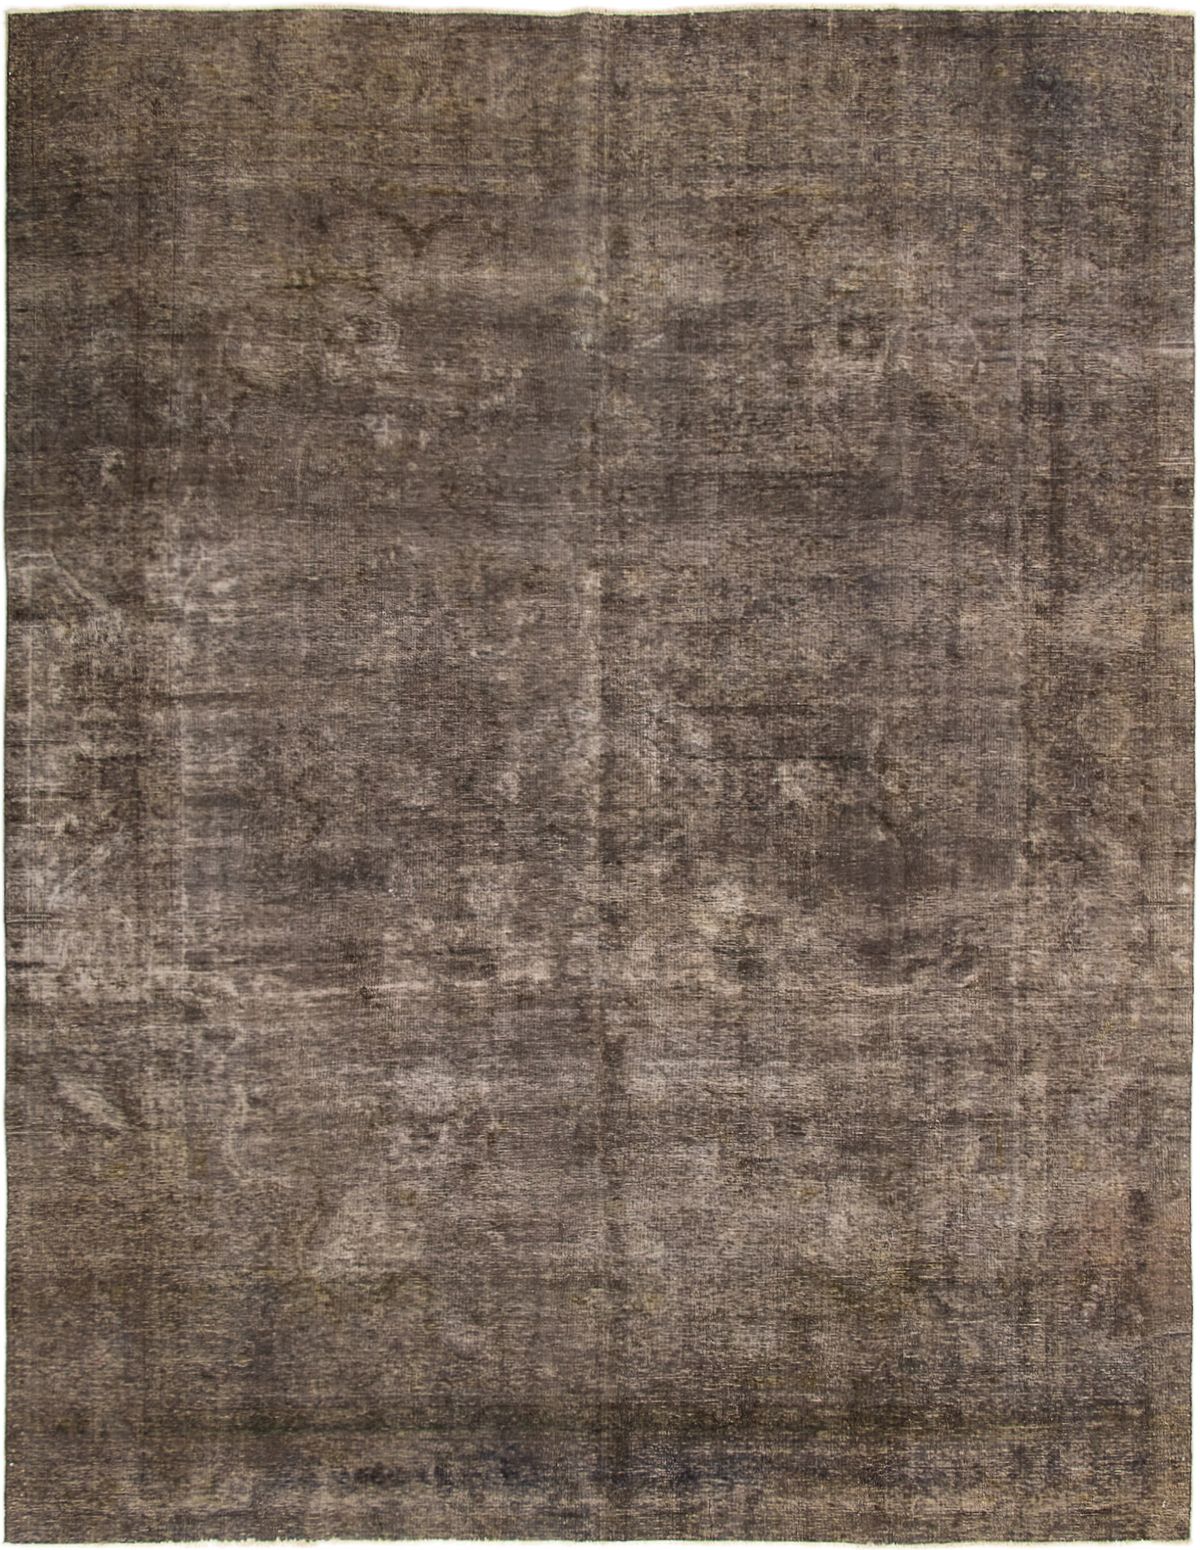 Hand-knotted Color Transition Dark Grey Wool Rug 9'7" x 12'5" Size: 9'7" x 12'5"  